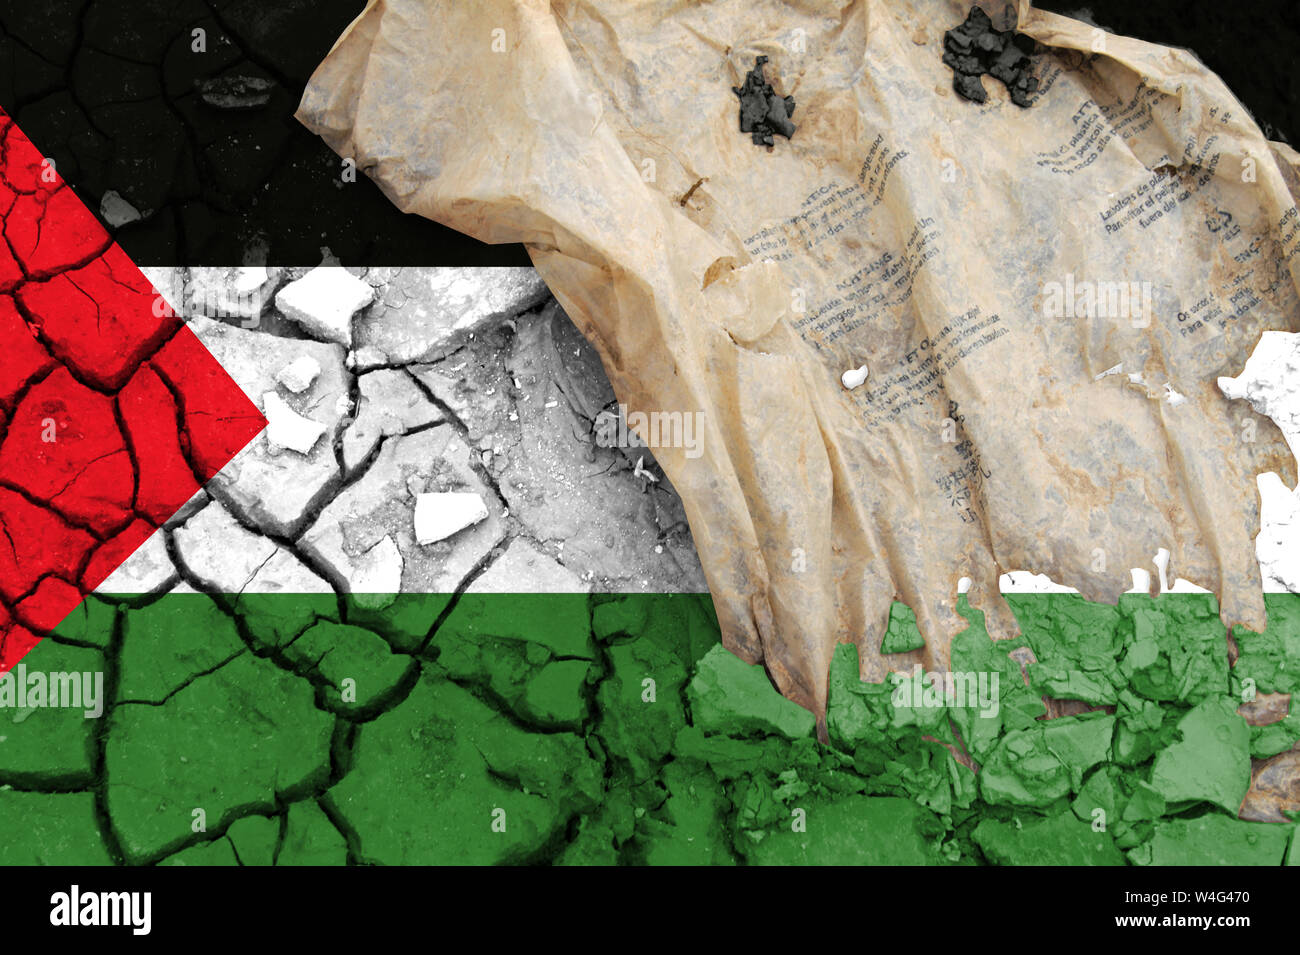 The flag of Palestine, the flag is depicted on cracked earth. Ecology concept with environmental pollution from household and industrial waste. Stock Photo